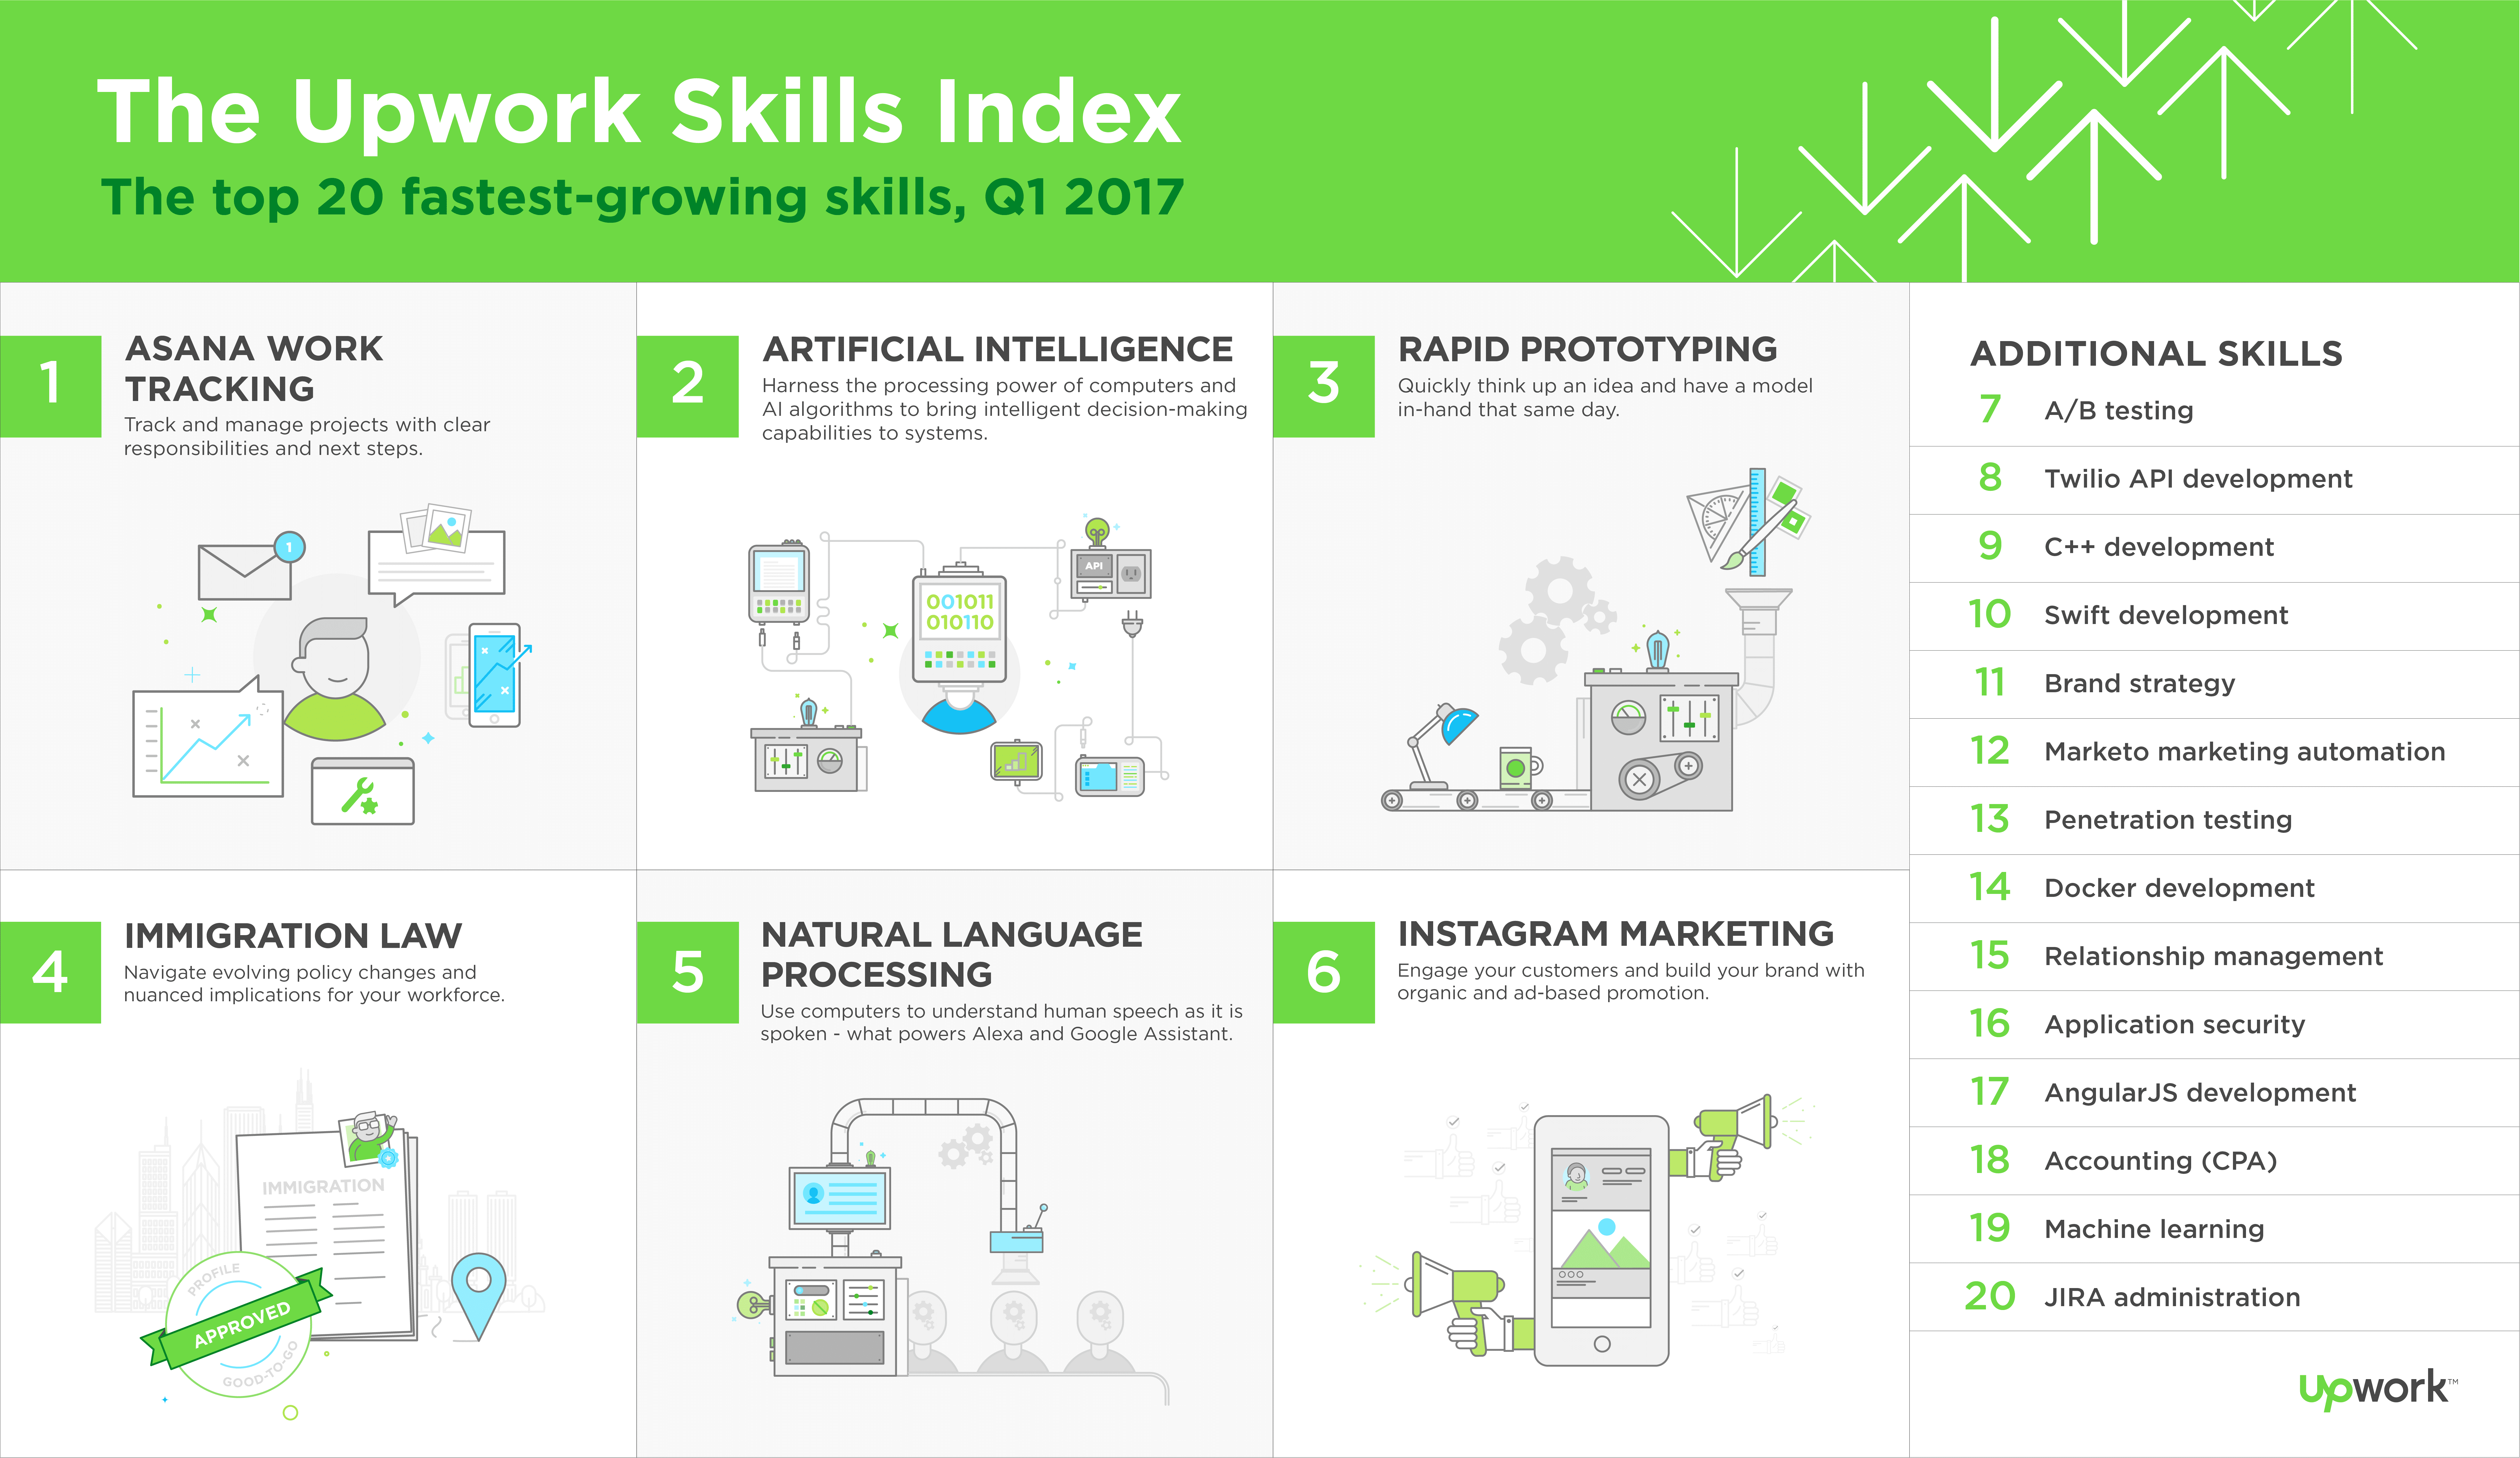 Index of the top 20 fastest-growing Upwork skills in Q1 2017